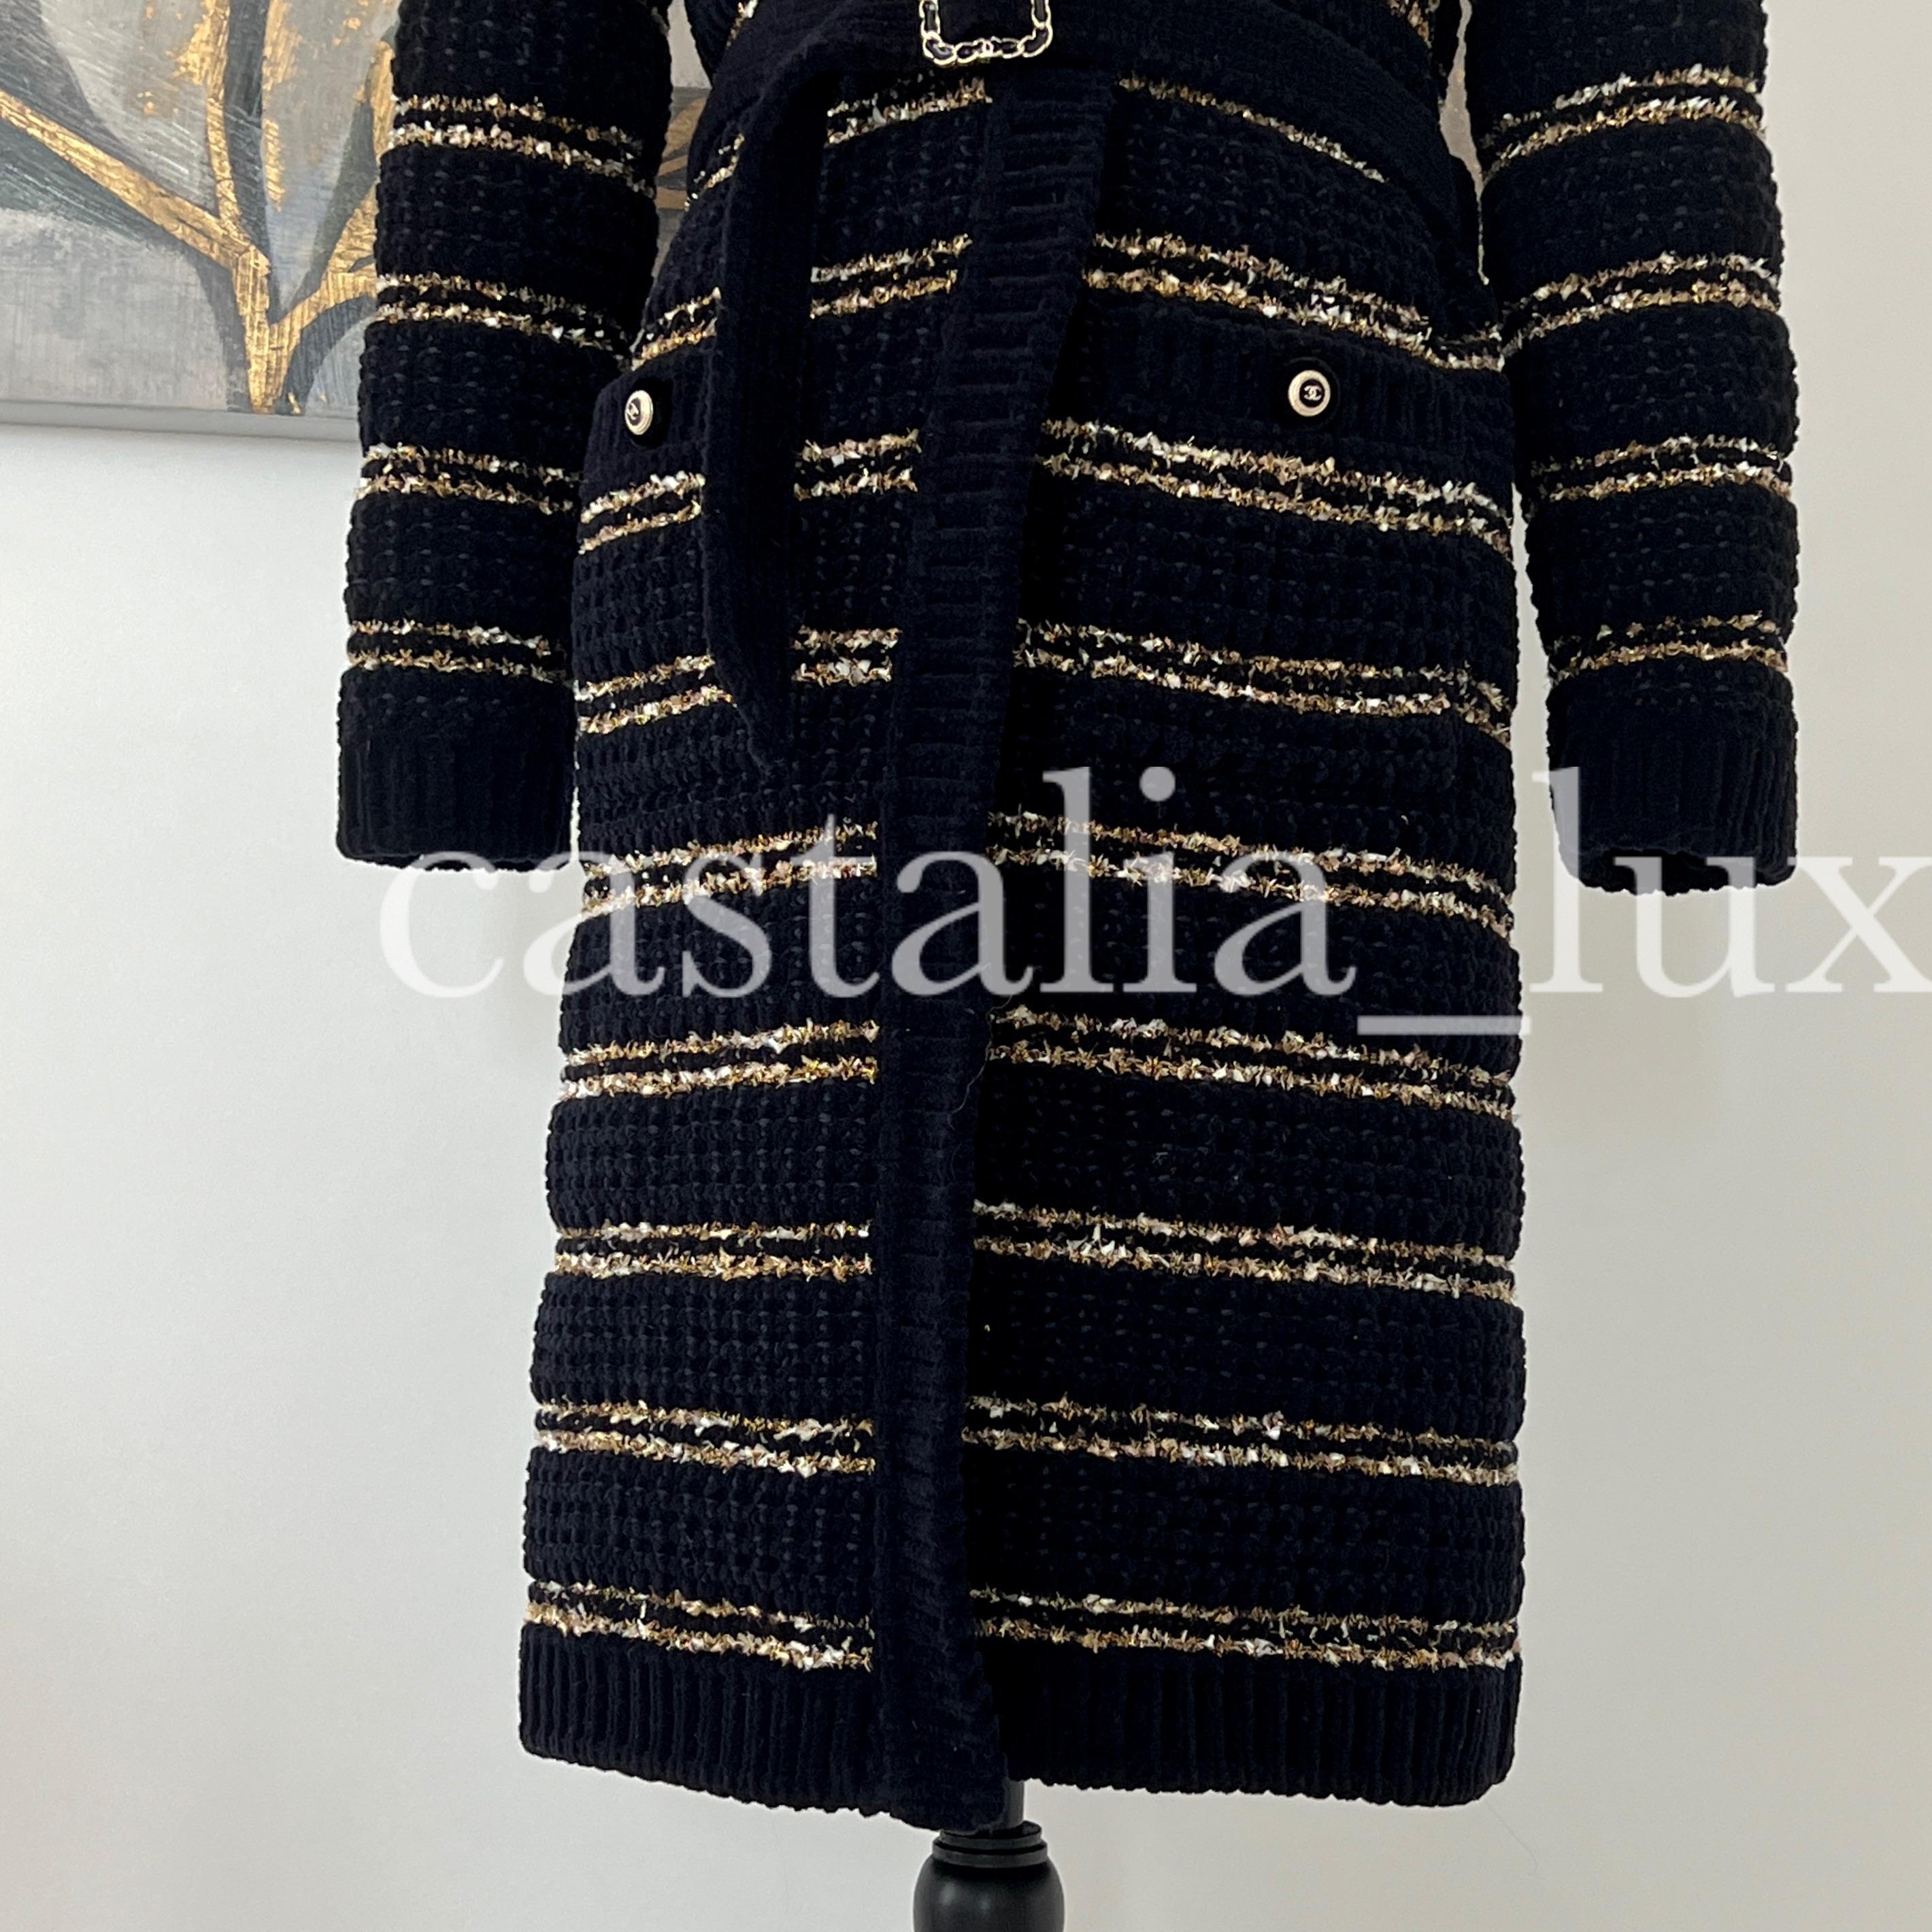 Chanel New 31 Rue Cambon Runway Relaxed Coat For Sale 5